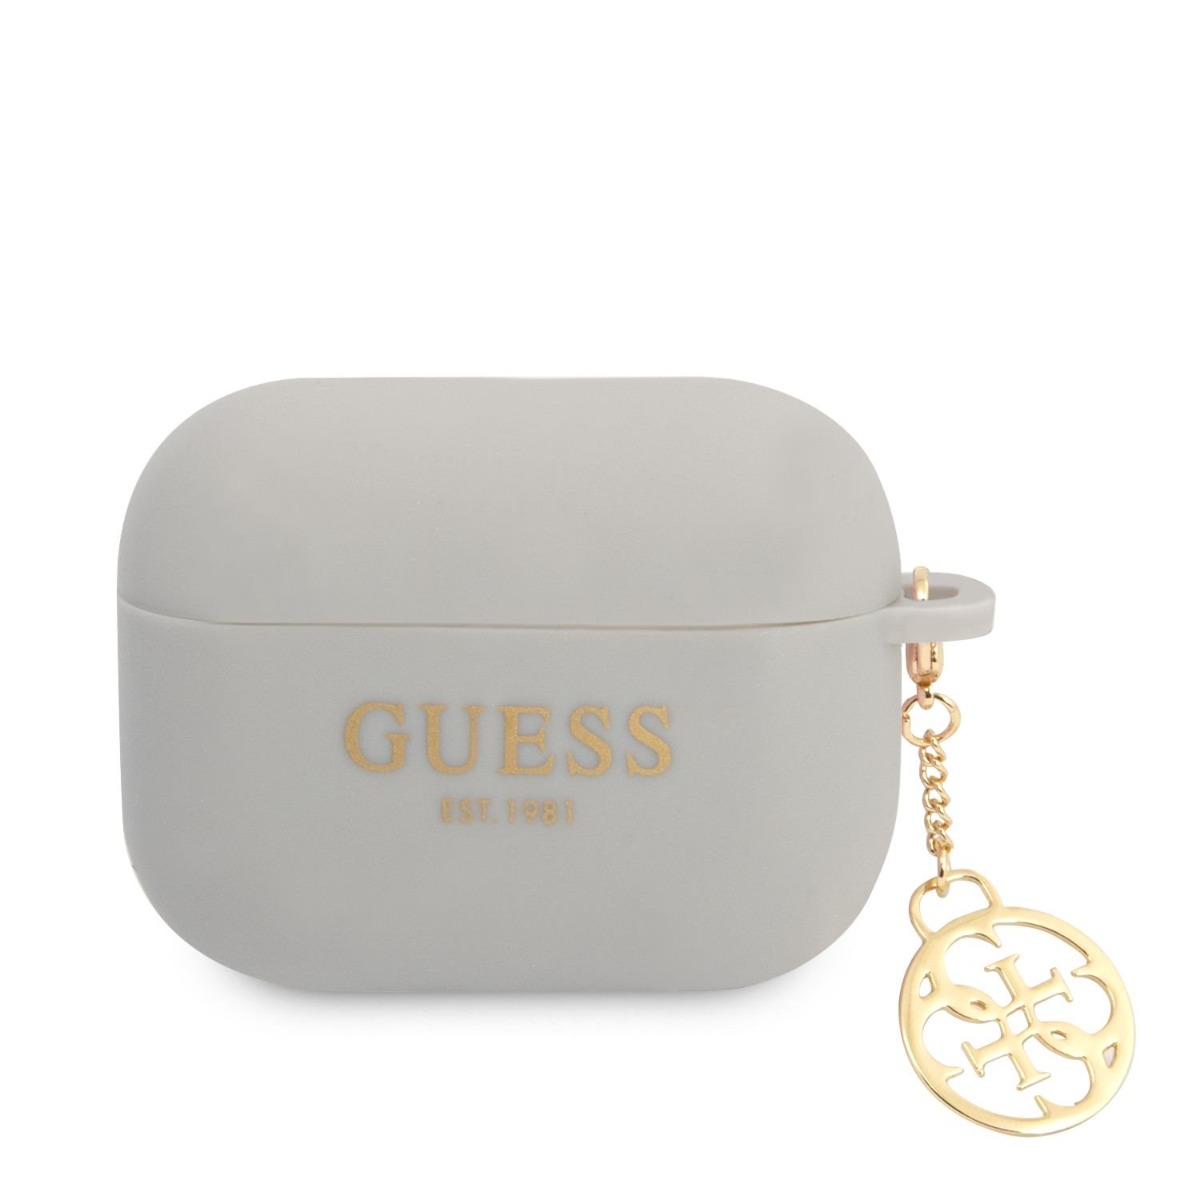 Husa Airpods Guess Pentru Airpods Pro, Charms, Silicon, Gri